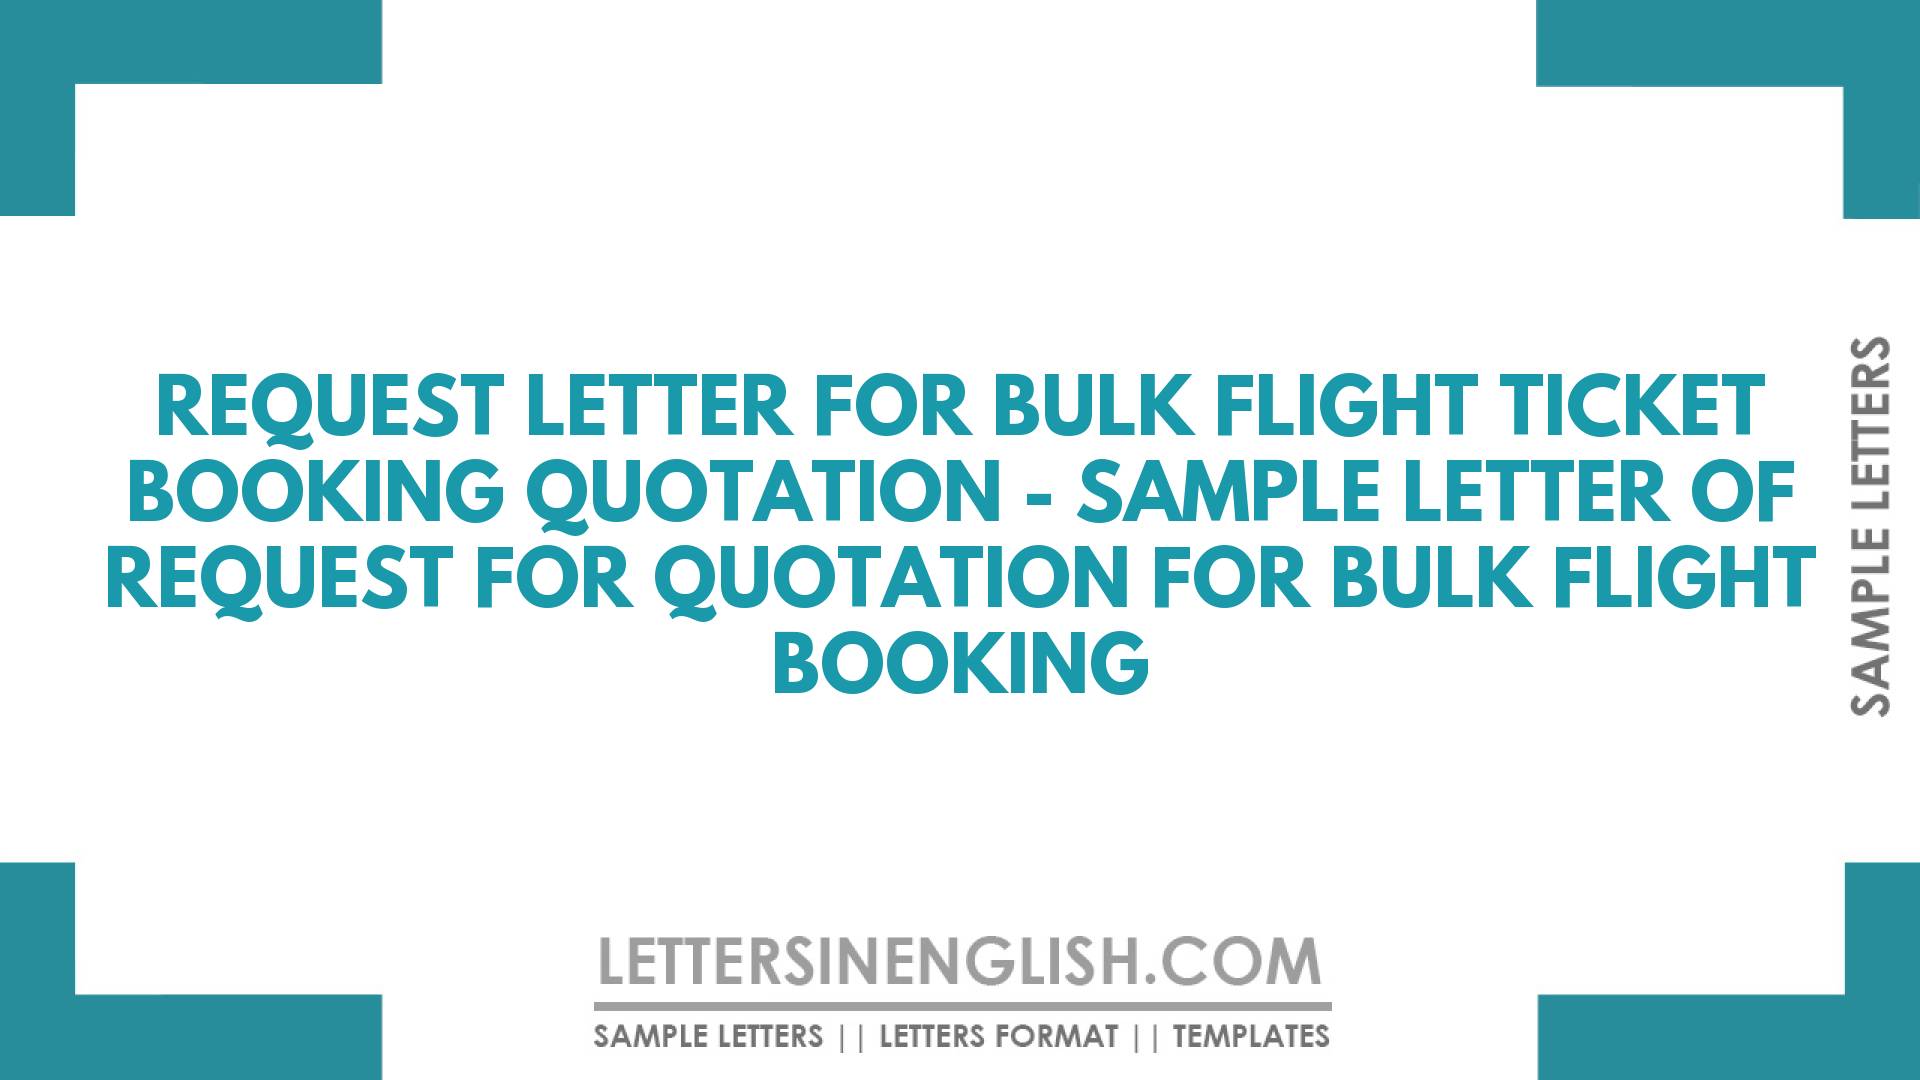 Request Letter for Bulk Flight Ticket Booking Quotation – Sample Letter of Request for Quotation for Bulk Flight Booking